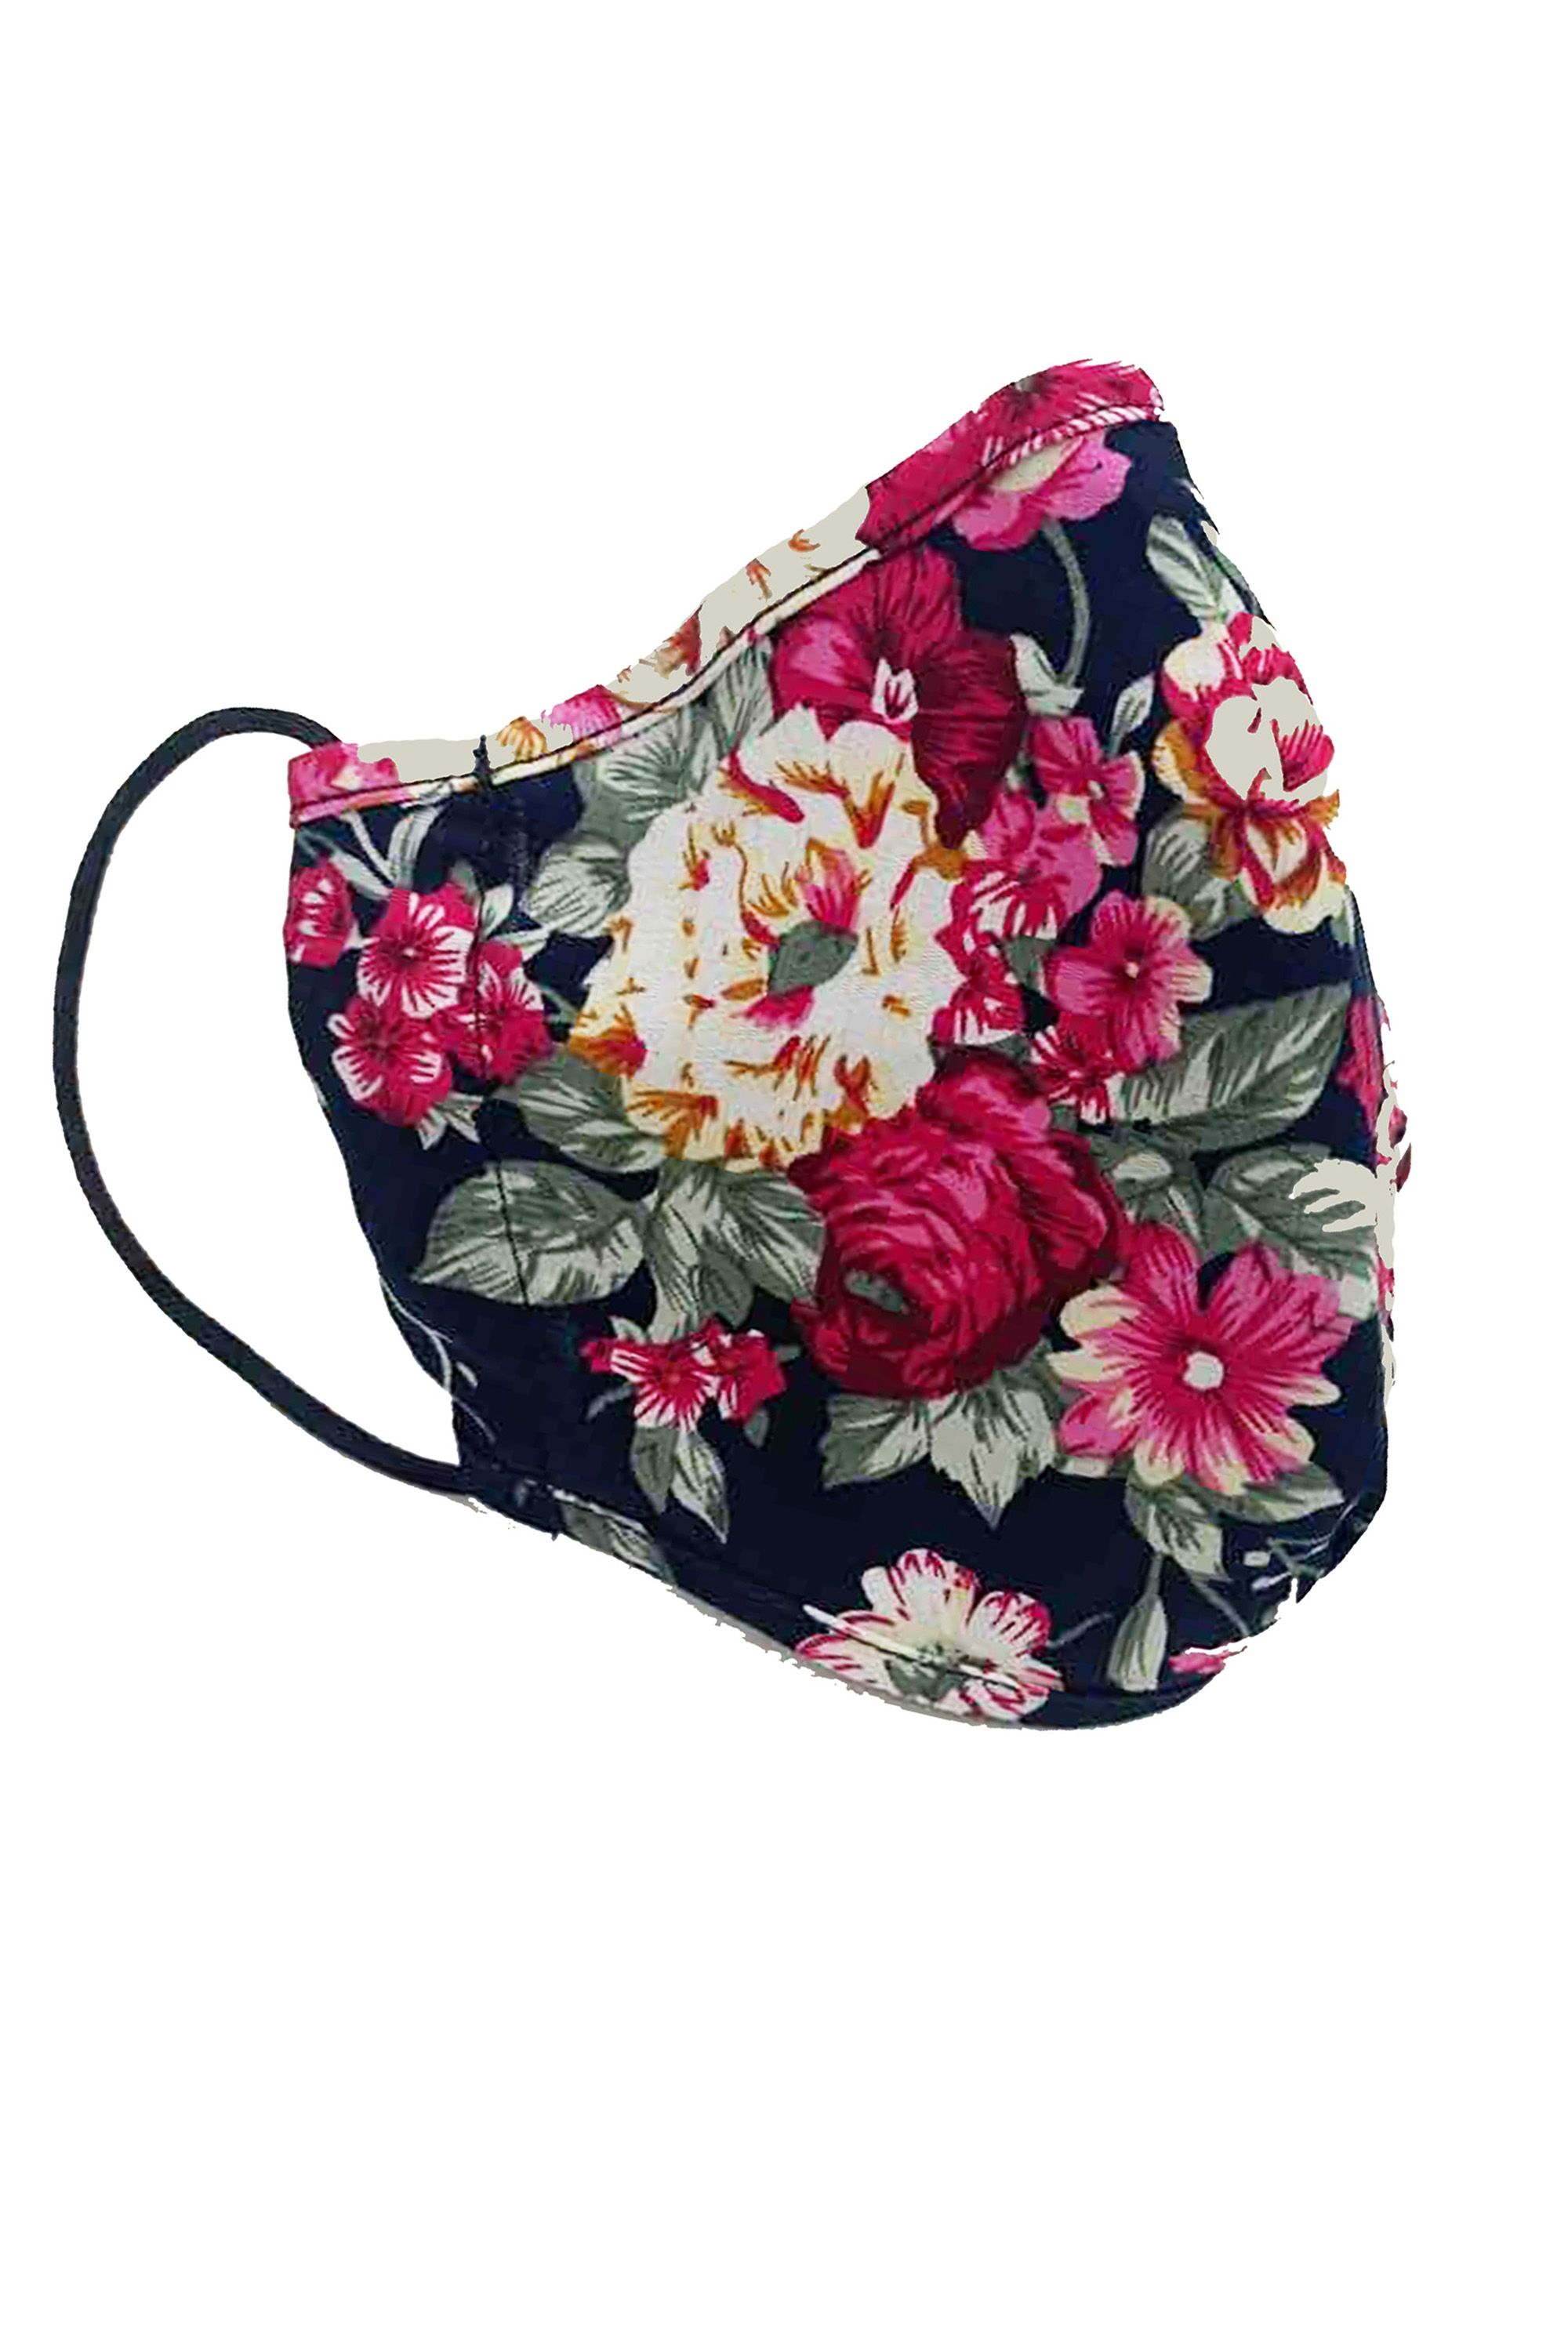 Easily washable and with a floral design, this Daisy Print Face Covering is comfortable to wear. Made from soft-touch cotton, it's cut from the end of our fabric rolls, so it's sustainable and kind to the planet.Please remember it is a non-medical mask and not PPE. Wash your hands before and after putting on the covering. ; One Pound from each covering is donated to Sufra, a charity that supports and provides food for people in extreme poverty. 100% Cotton, Lining:100% Cotton